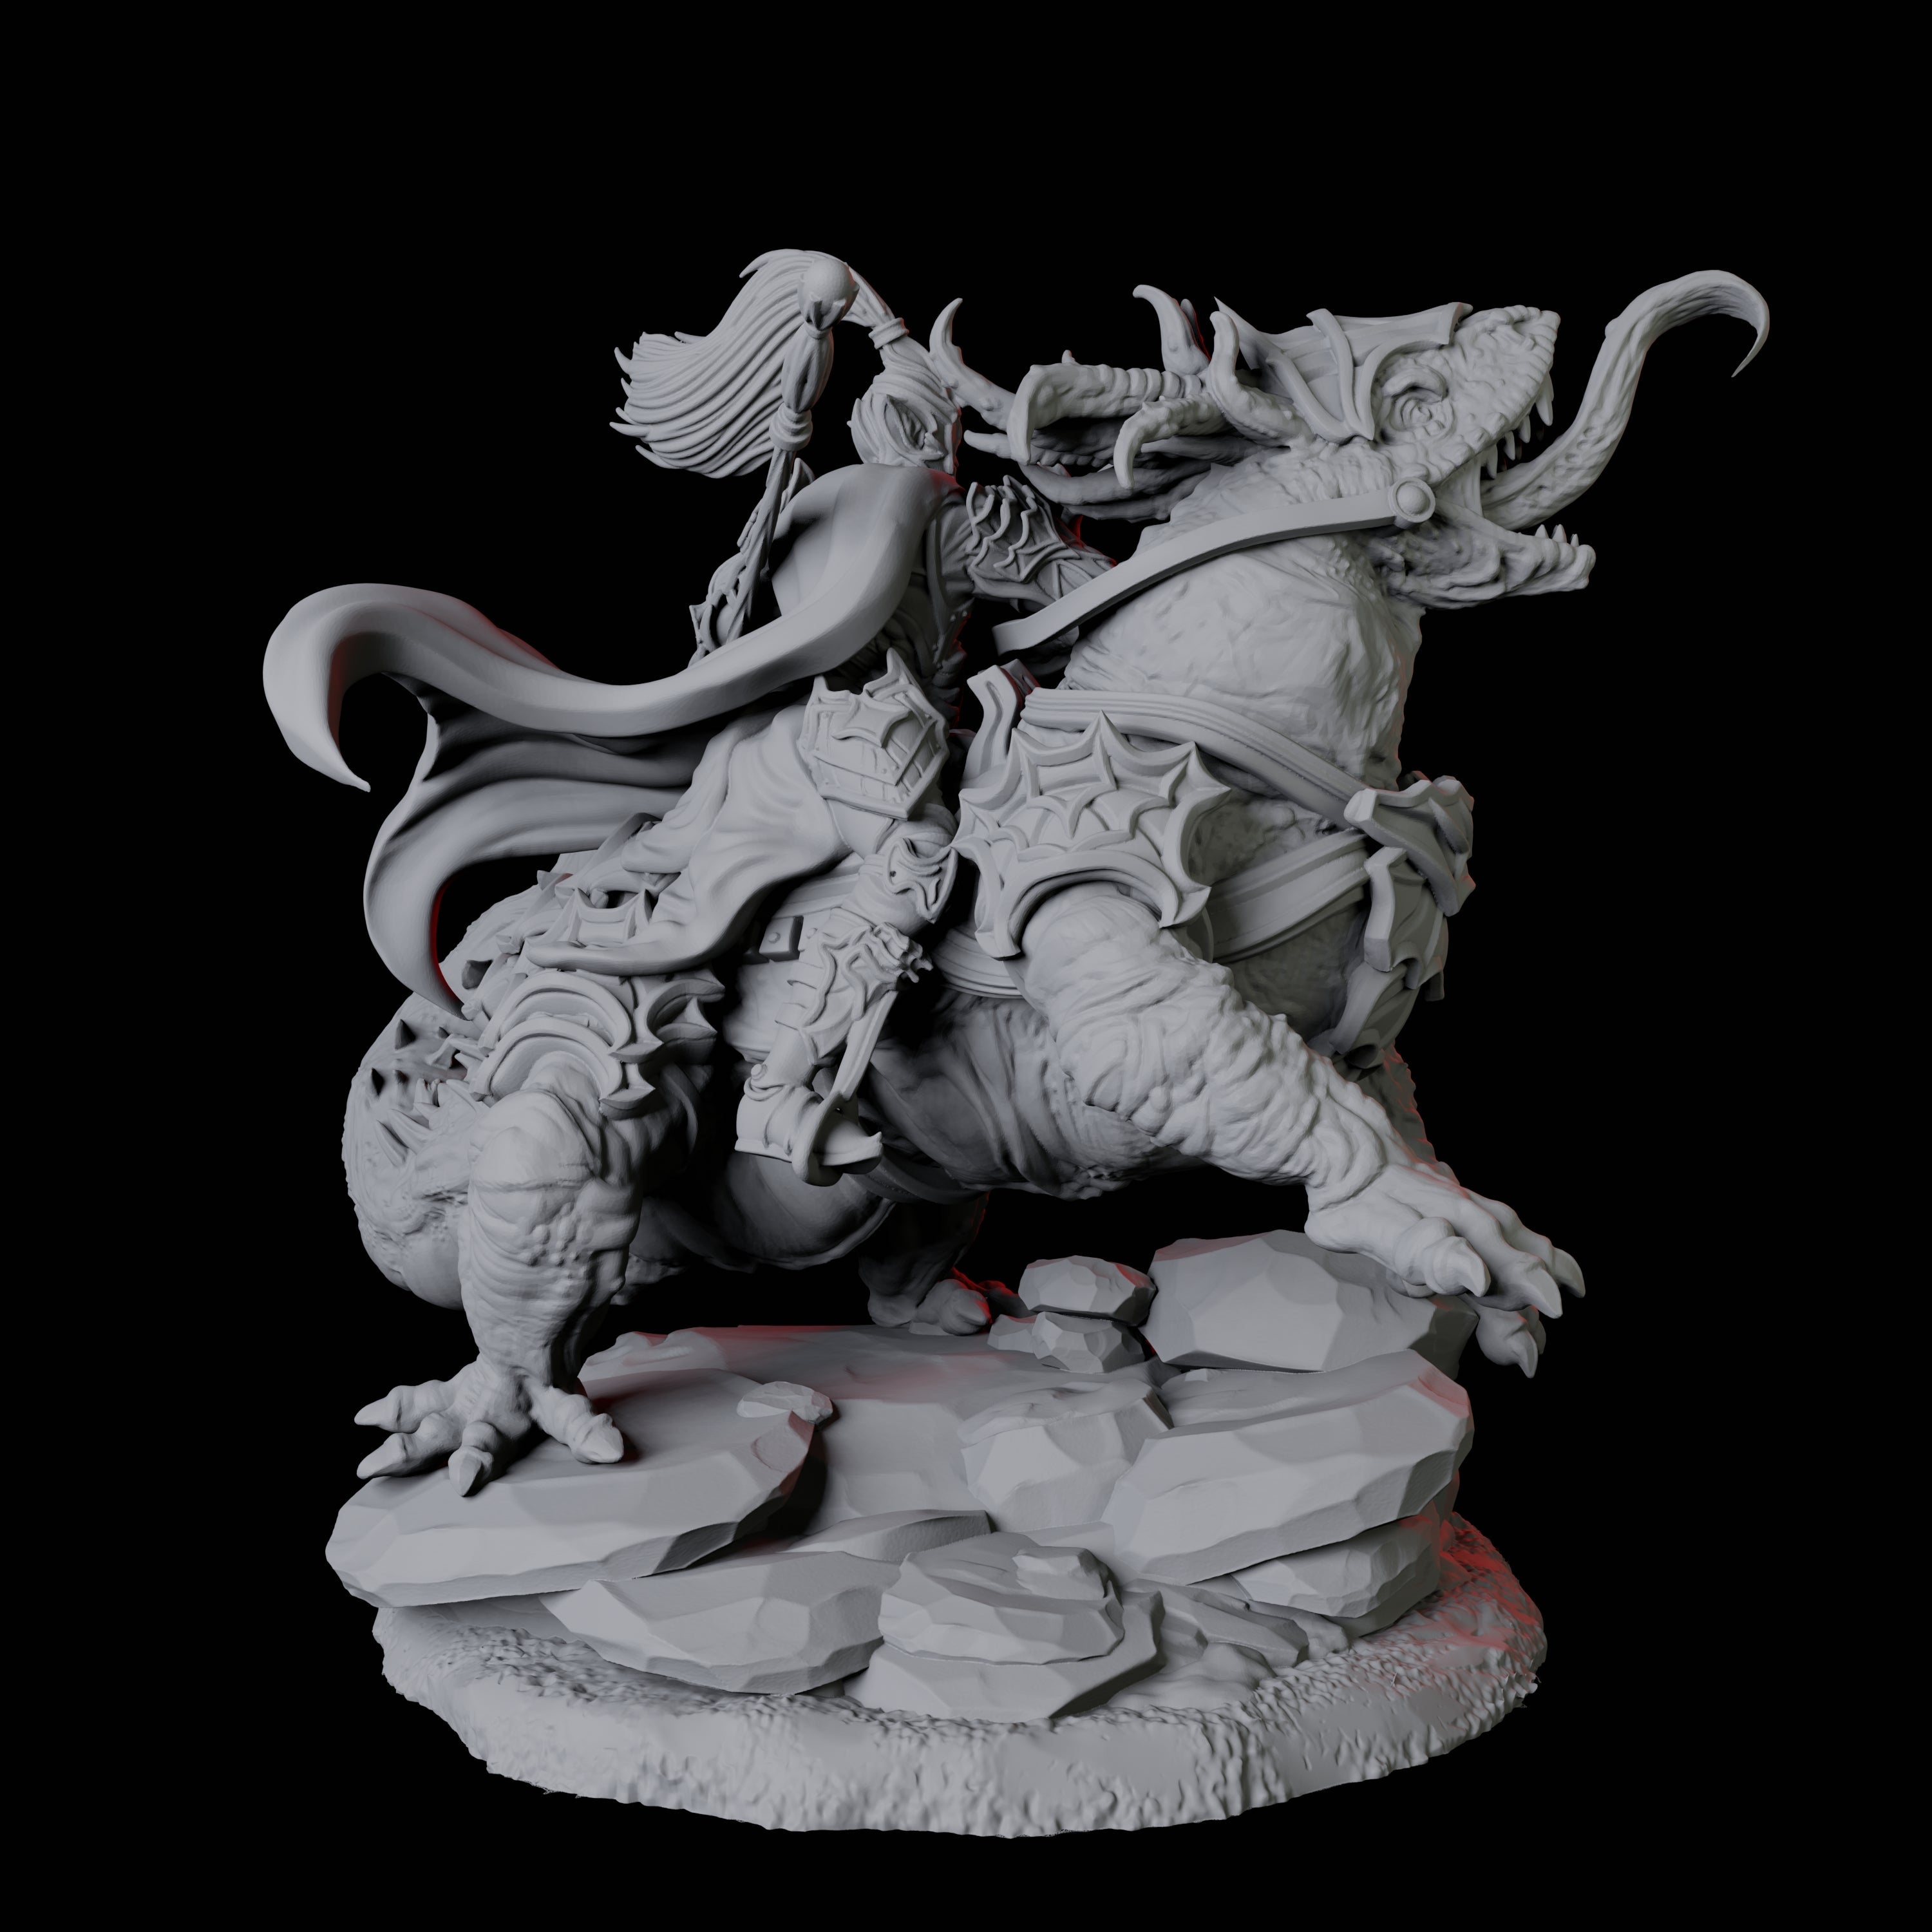 Fighter mounted on Giant Lizard C Miniature for Dungeons and Dragons, Pathfinder or other TTRPGs